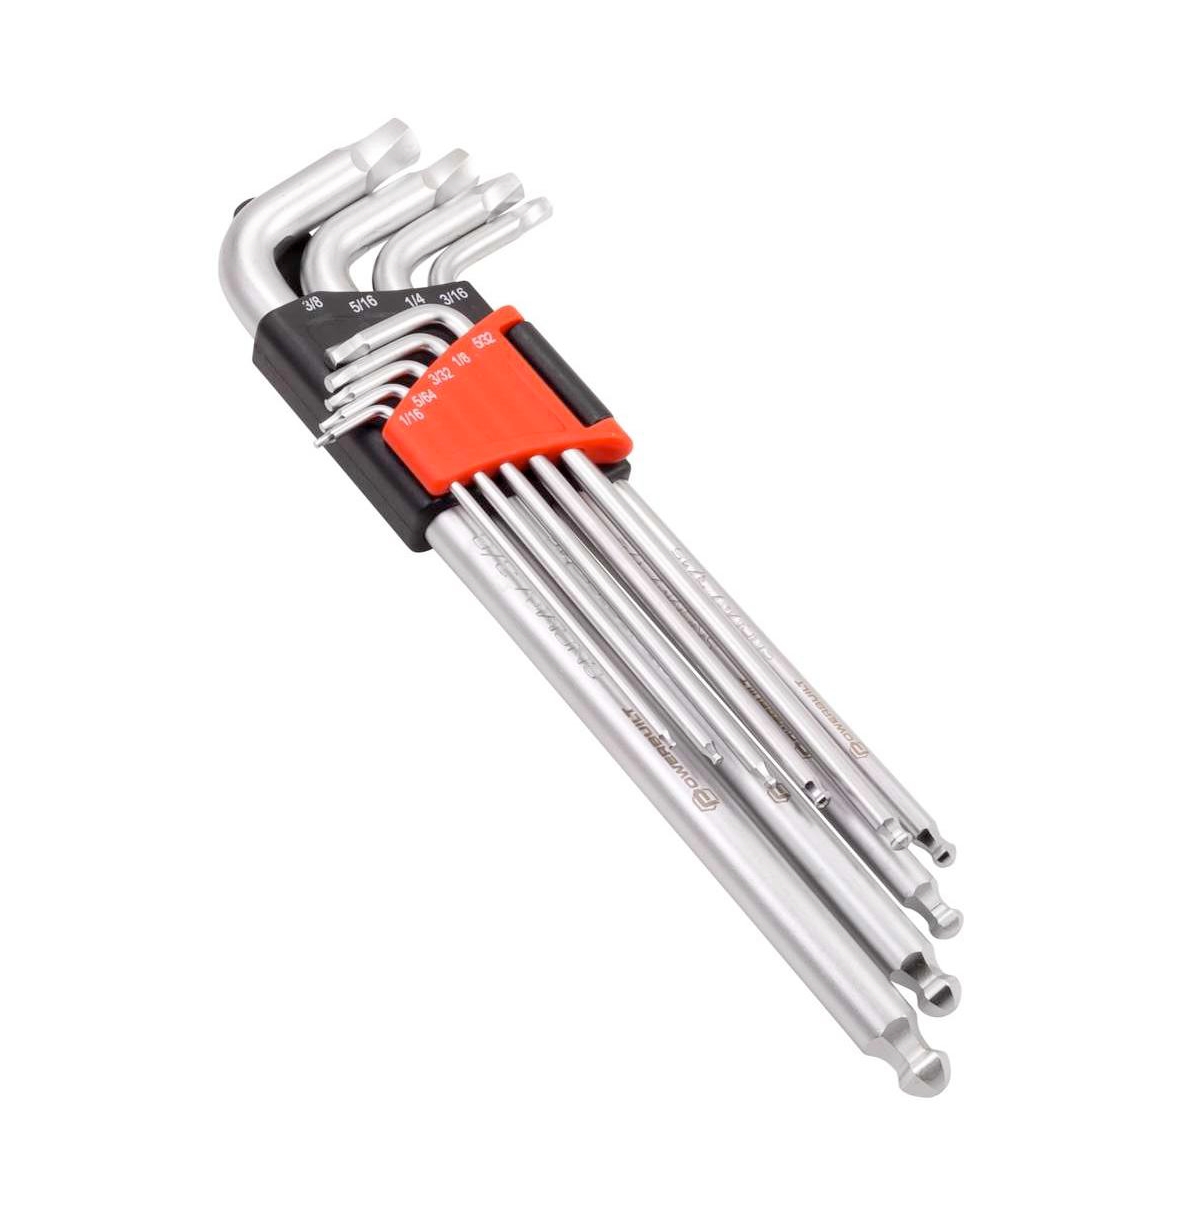 9 Piece Zeon Sae Hex Key Wrench Set for Damaged Fasteners - Silver